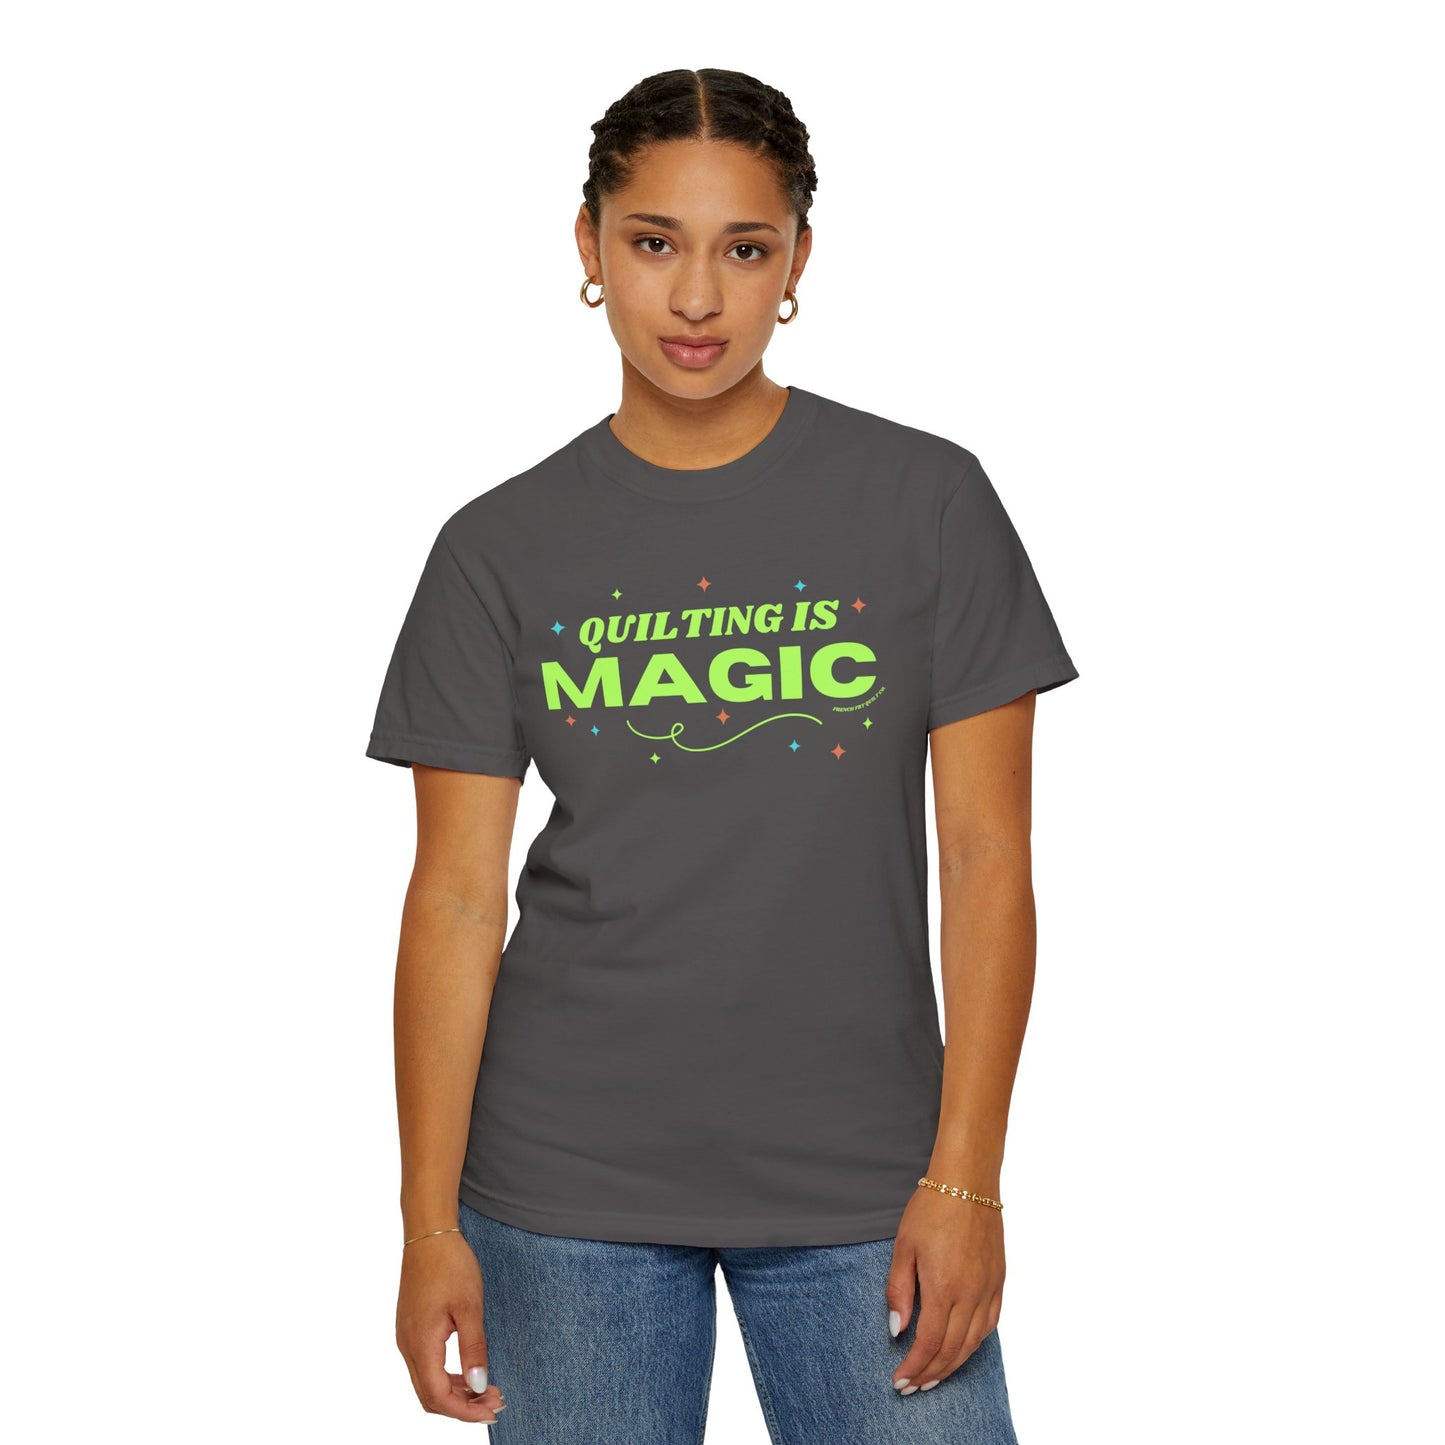 "Quilting Is Magic" Unisex Garment-Dyed T-shirt